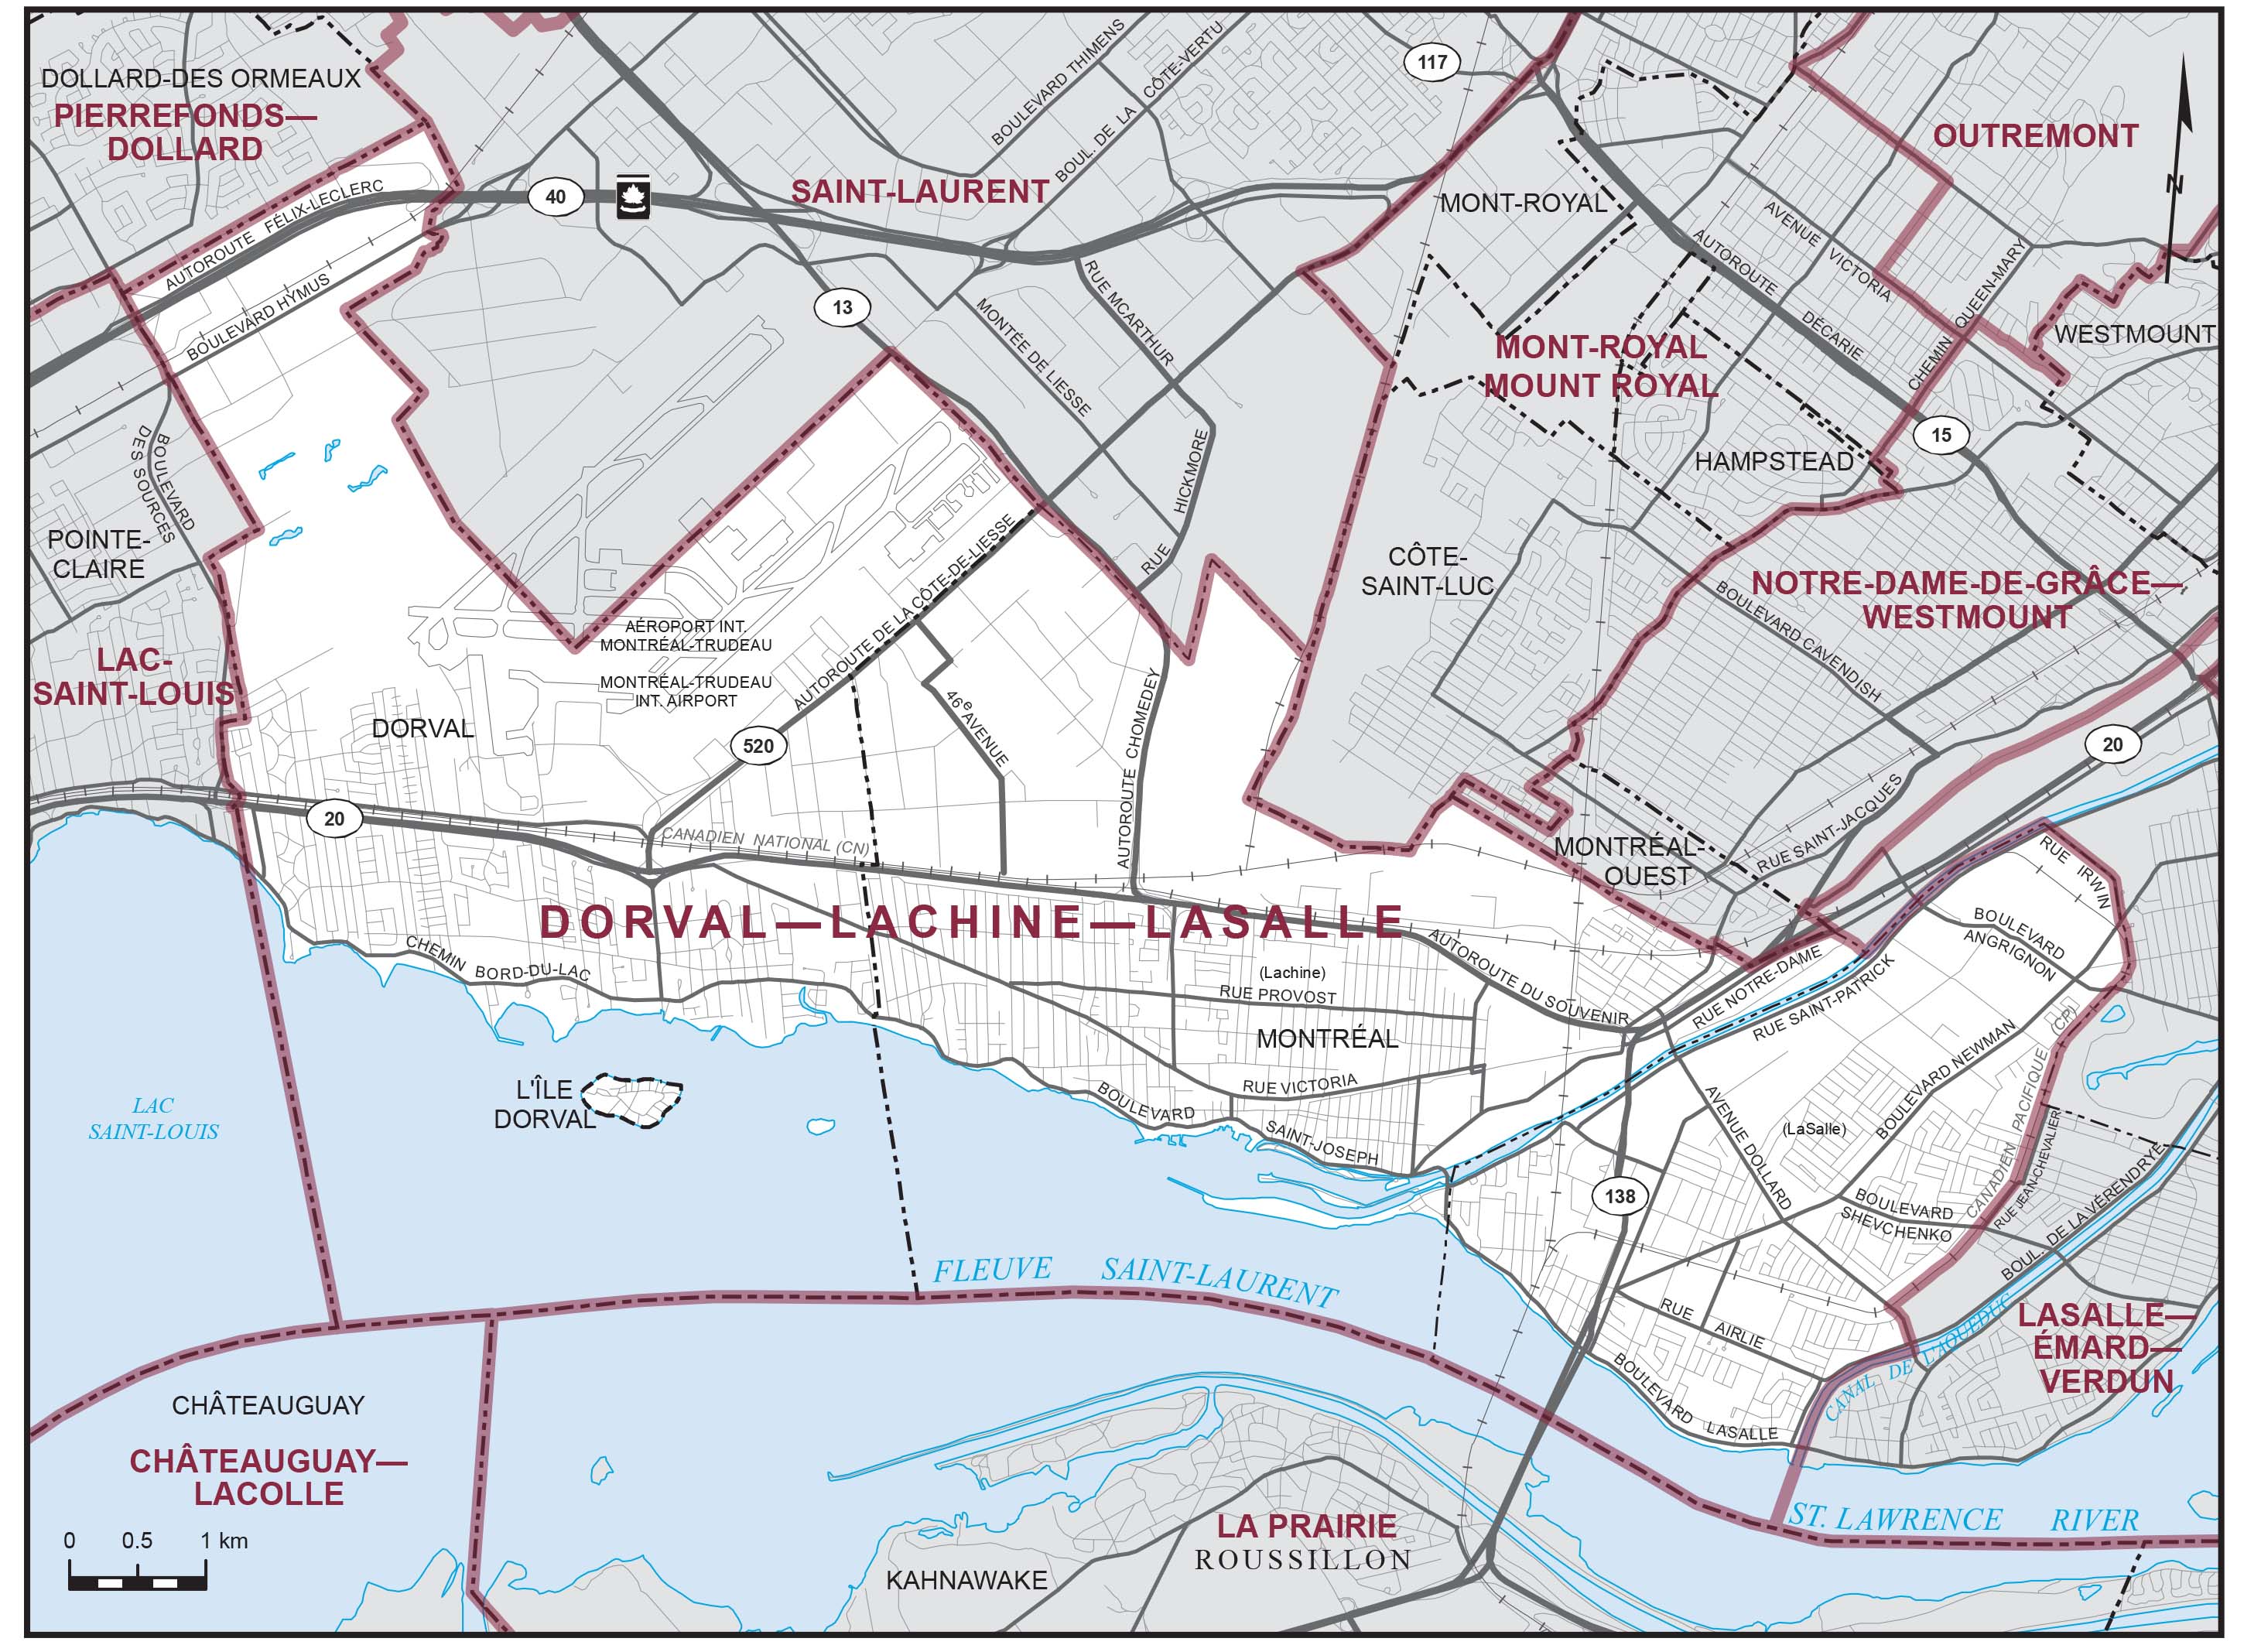 Map: Dorval--Lachine--LaSalle, Federal electoral district, 2013 Representation Order (in white), Quebec